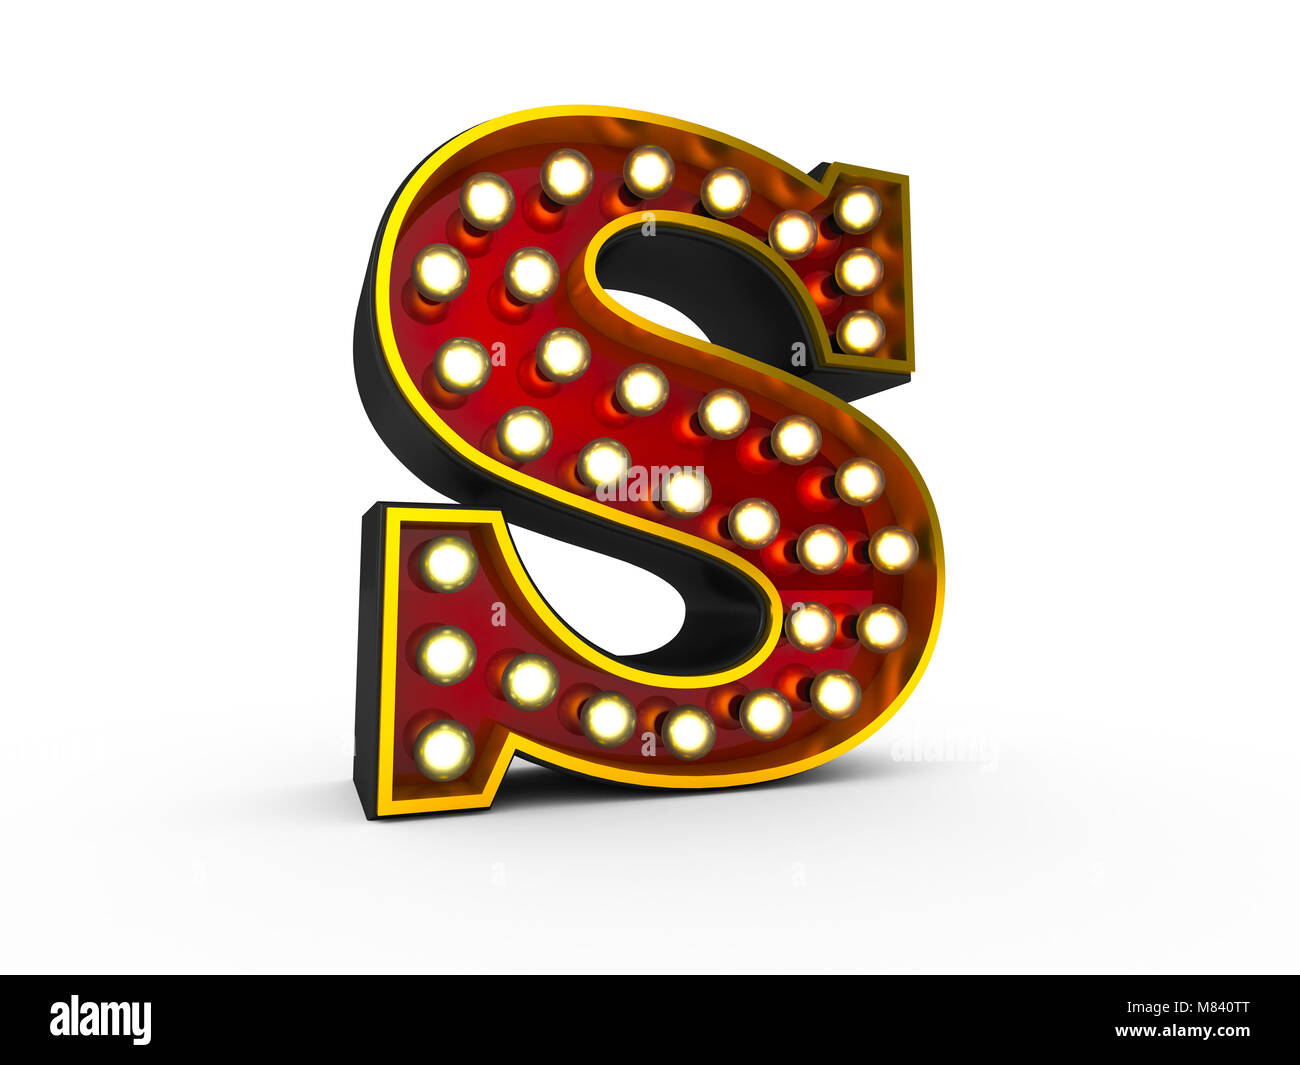 High quality 3D illustration of the letter S in Broadway style with light bulbs illuminating it over white background Stock Photo